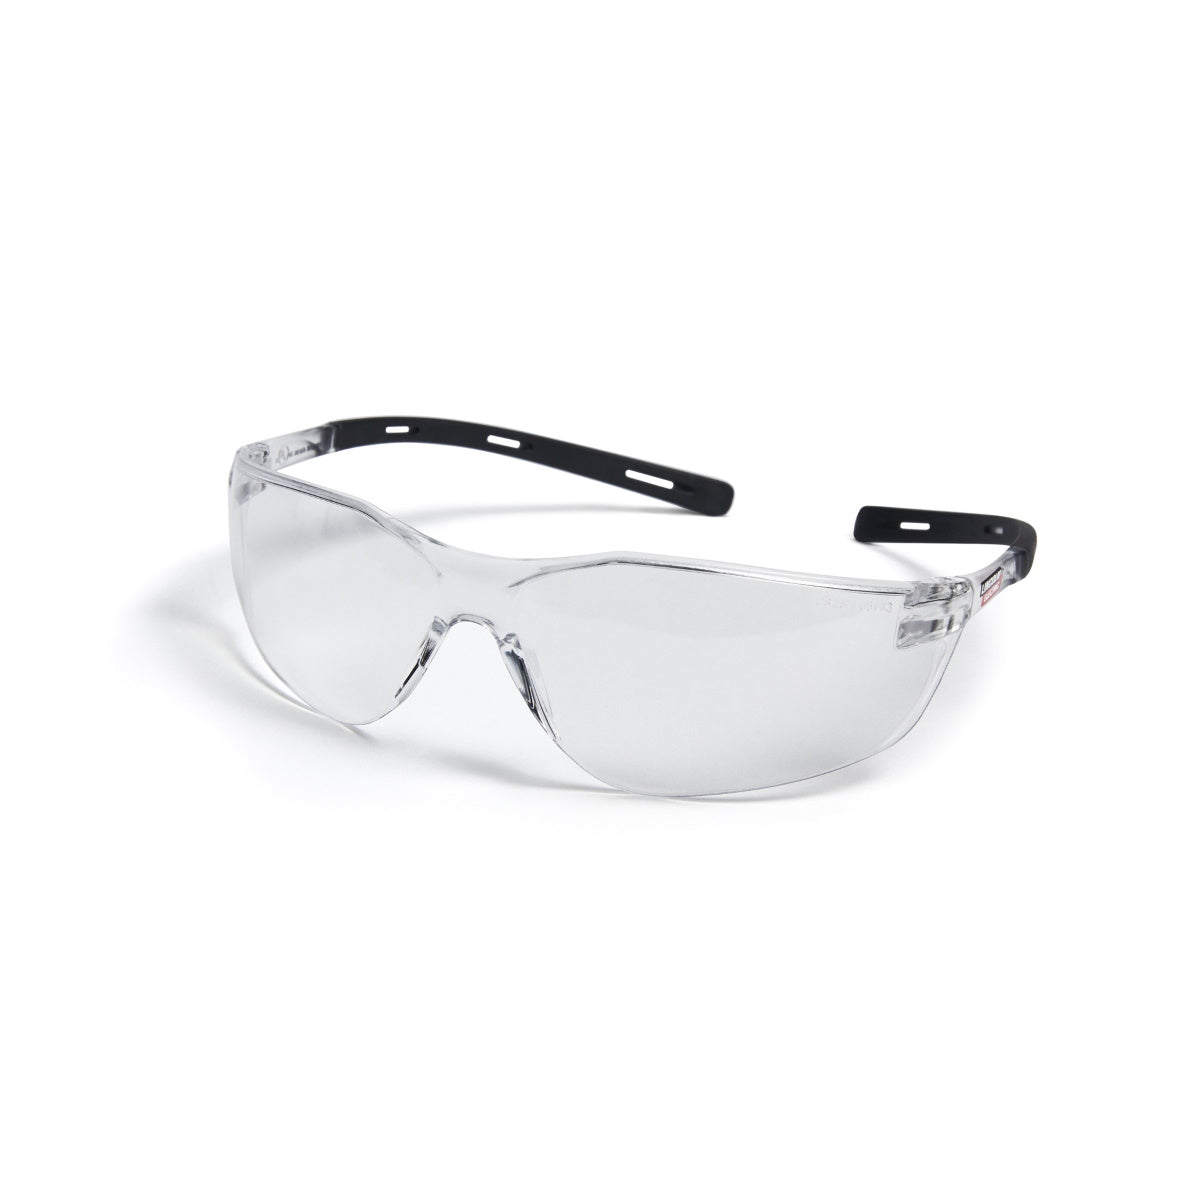 Lincoln Axilite Clear Anti-Fog/Scratch Safety Glasses (K4673-1)